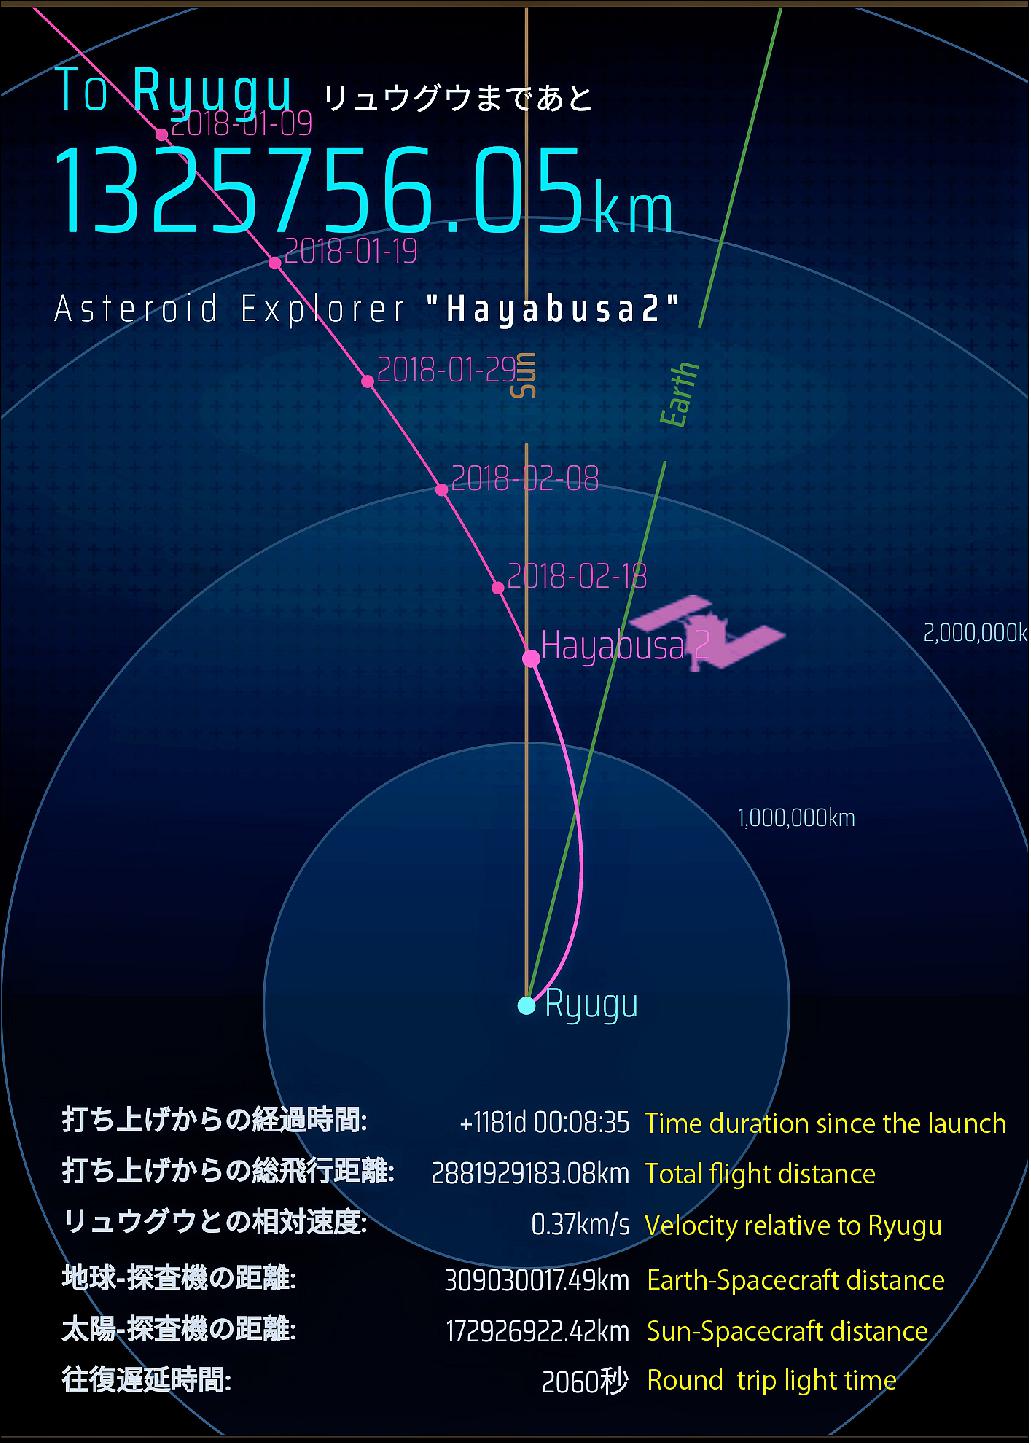 Figure 107: The position of Hayabusa-2 on February 26, 2018, captured from the diagram at the top of the mission website.